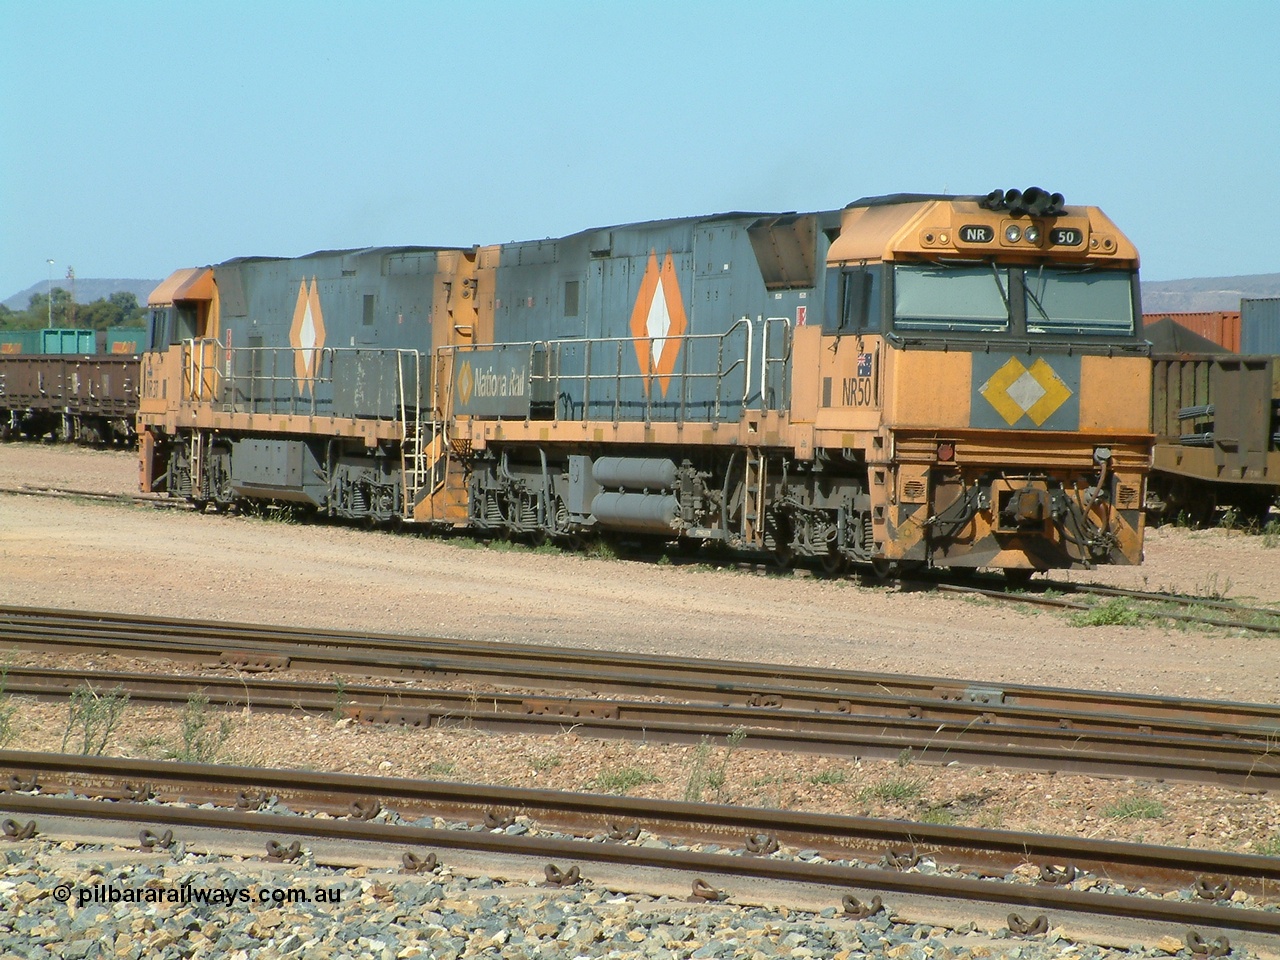 030404 103651
Port Augusta Spencer Junction yard, National Rail Goninan built GE Cv40-9i model NR class unit NR 50 serial 7250-08 / 97-252 lay about the yard in between jobs. 4th April 2003.
Keywords: NR-class;NR50;7250-08/97-252;Goninan;GE;Cv40-9i;